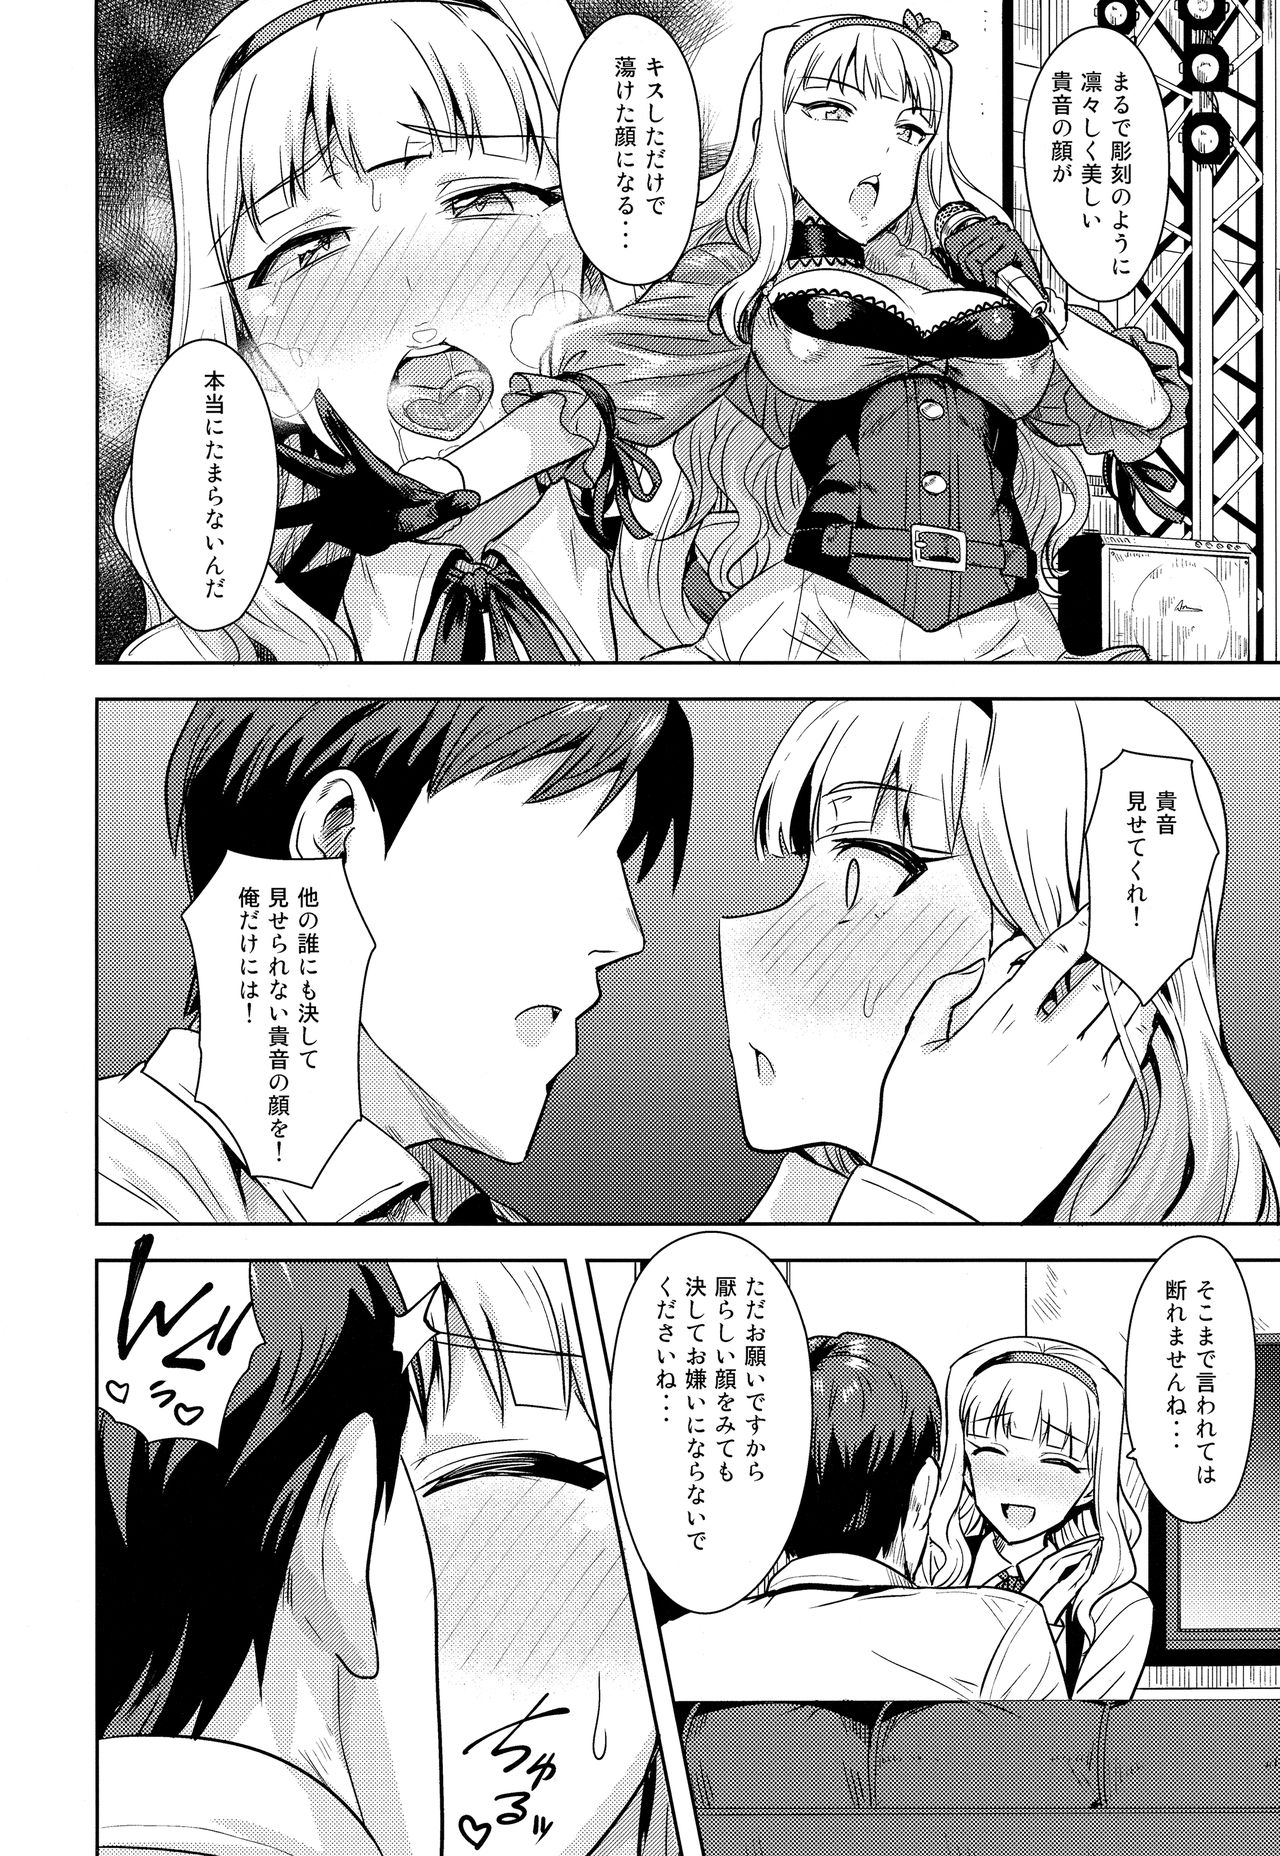 [PLANT (Tsurui)] SWEET MOON 2 (THE IDOLM@STER) page 9 full